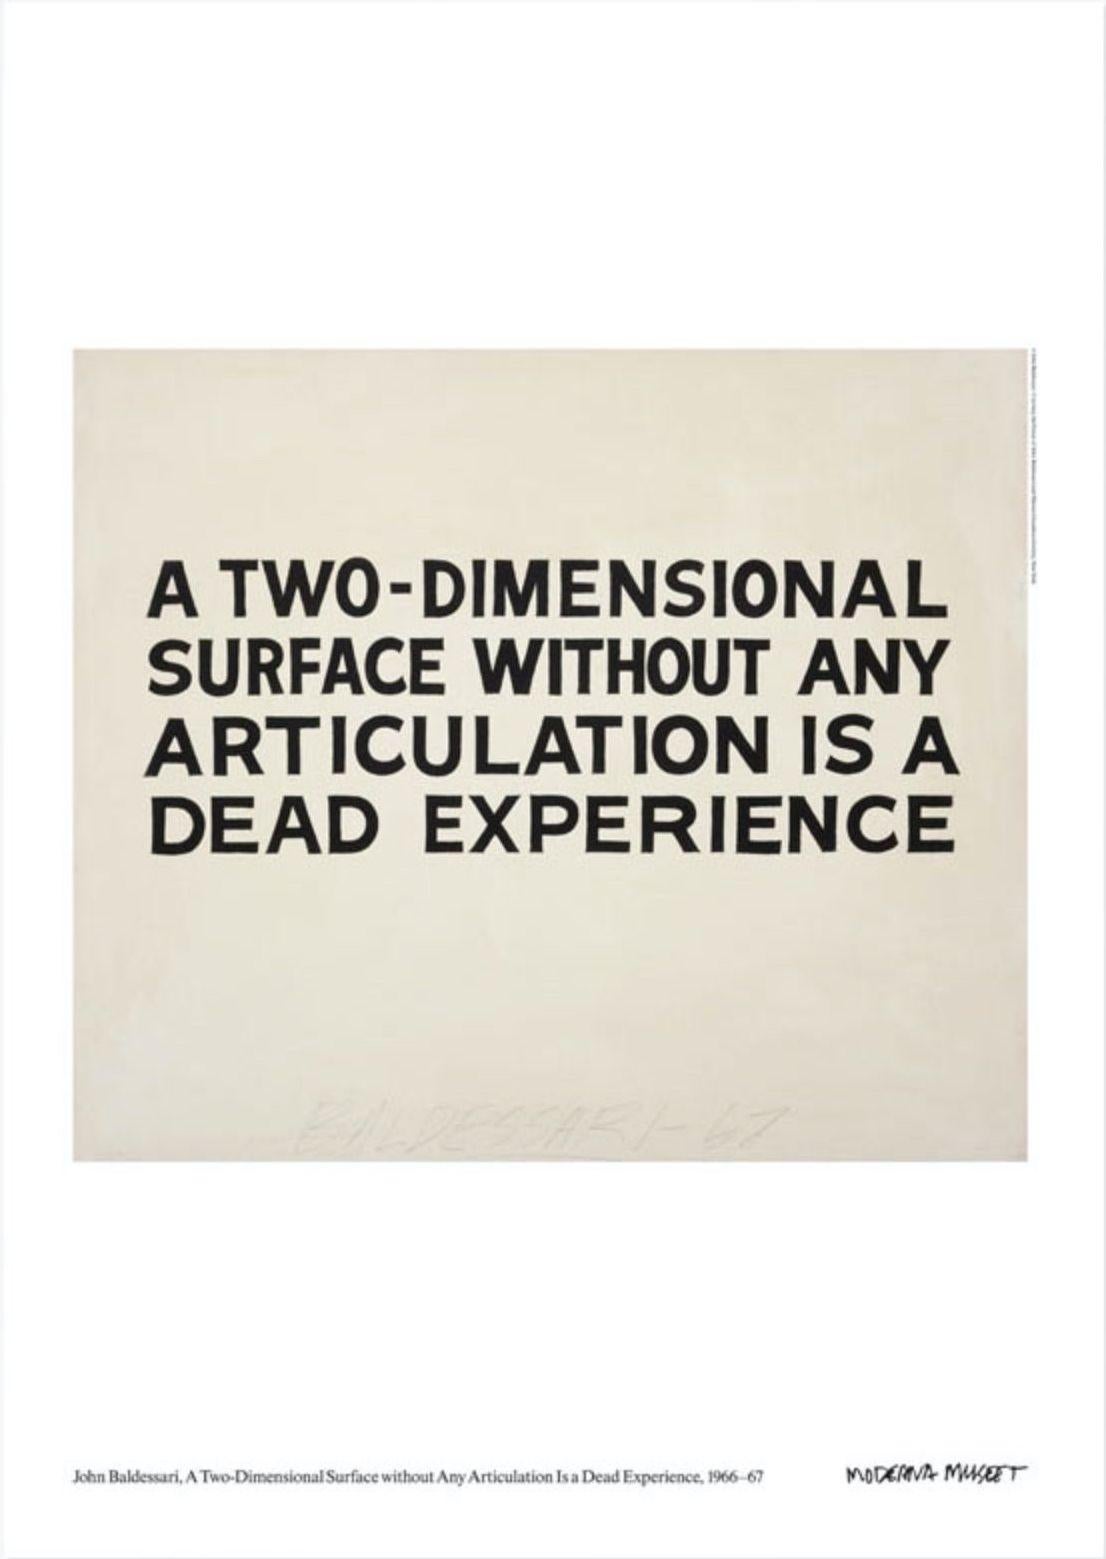 'A two-dimensional surface without any articulation is a dead experience' poster